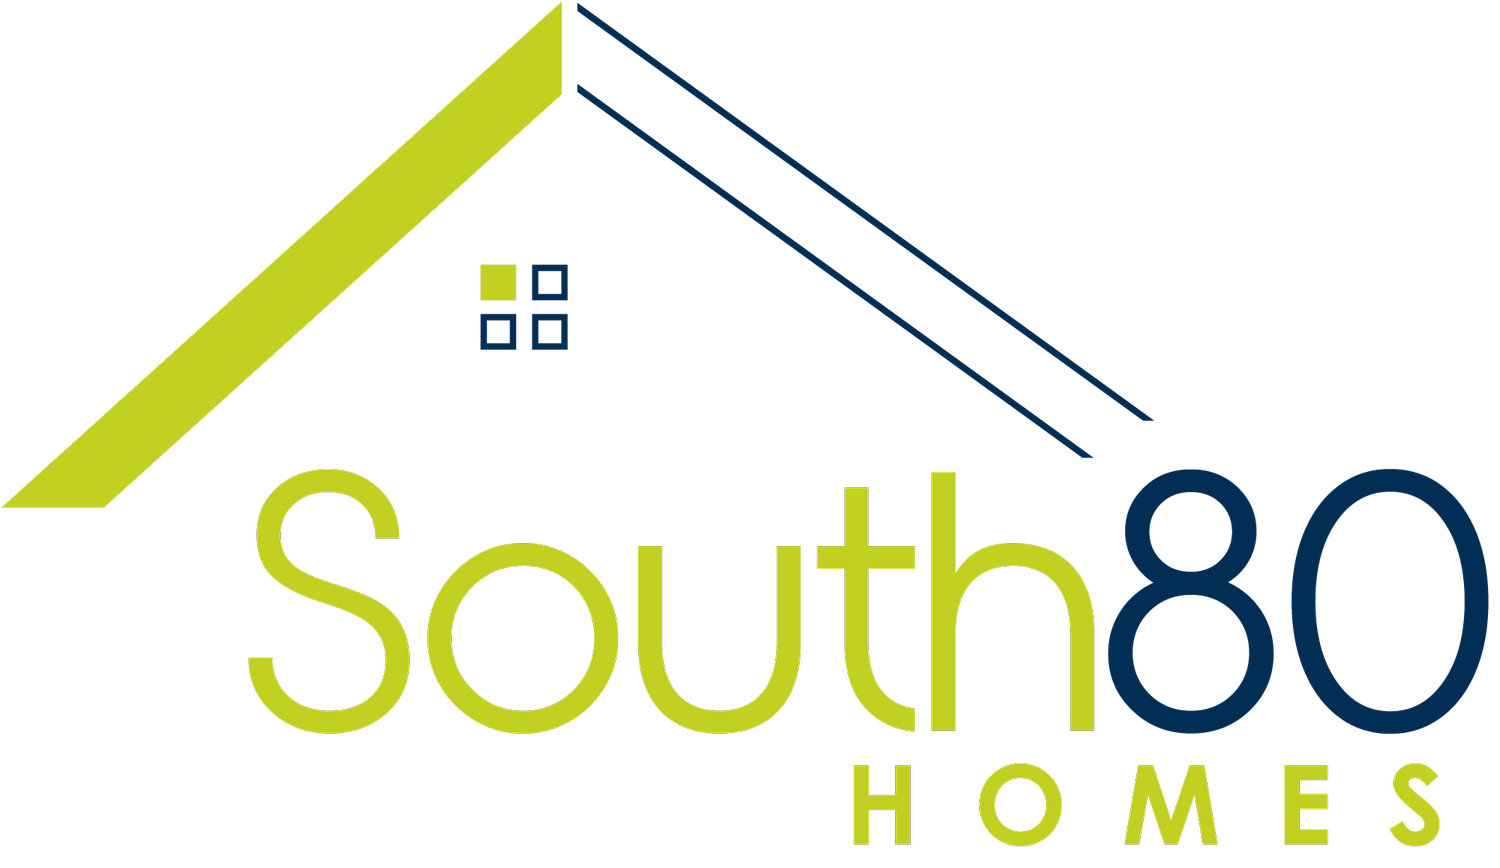 South 80 Homes